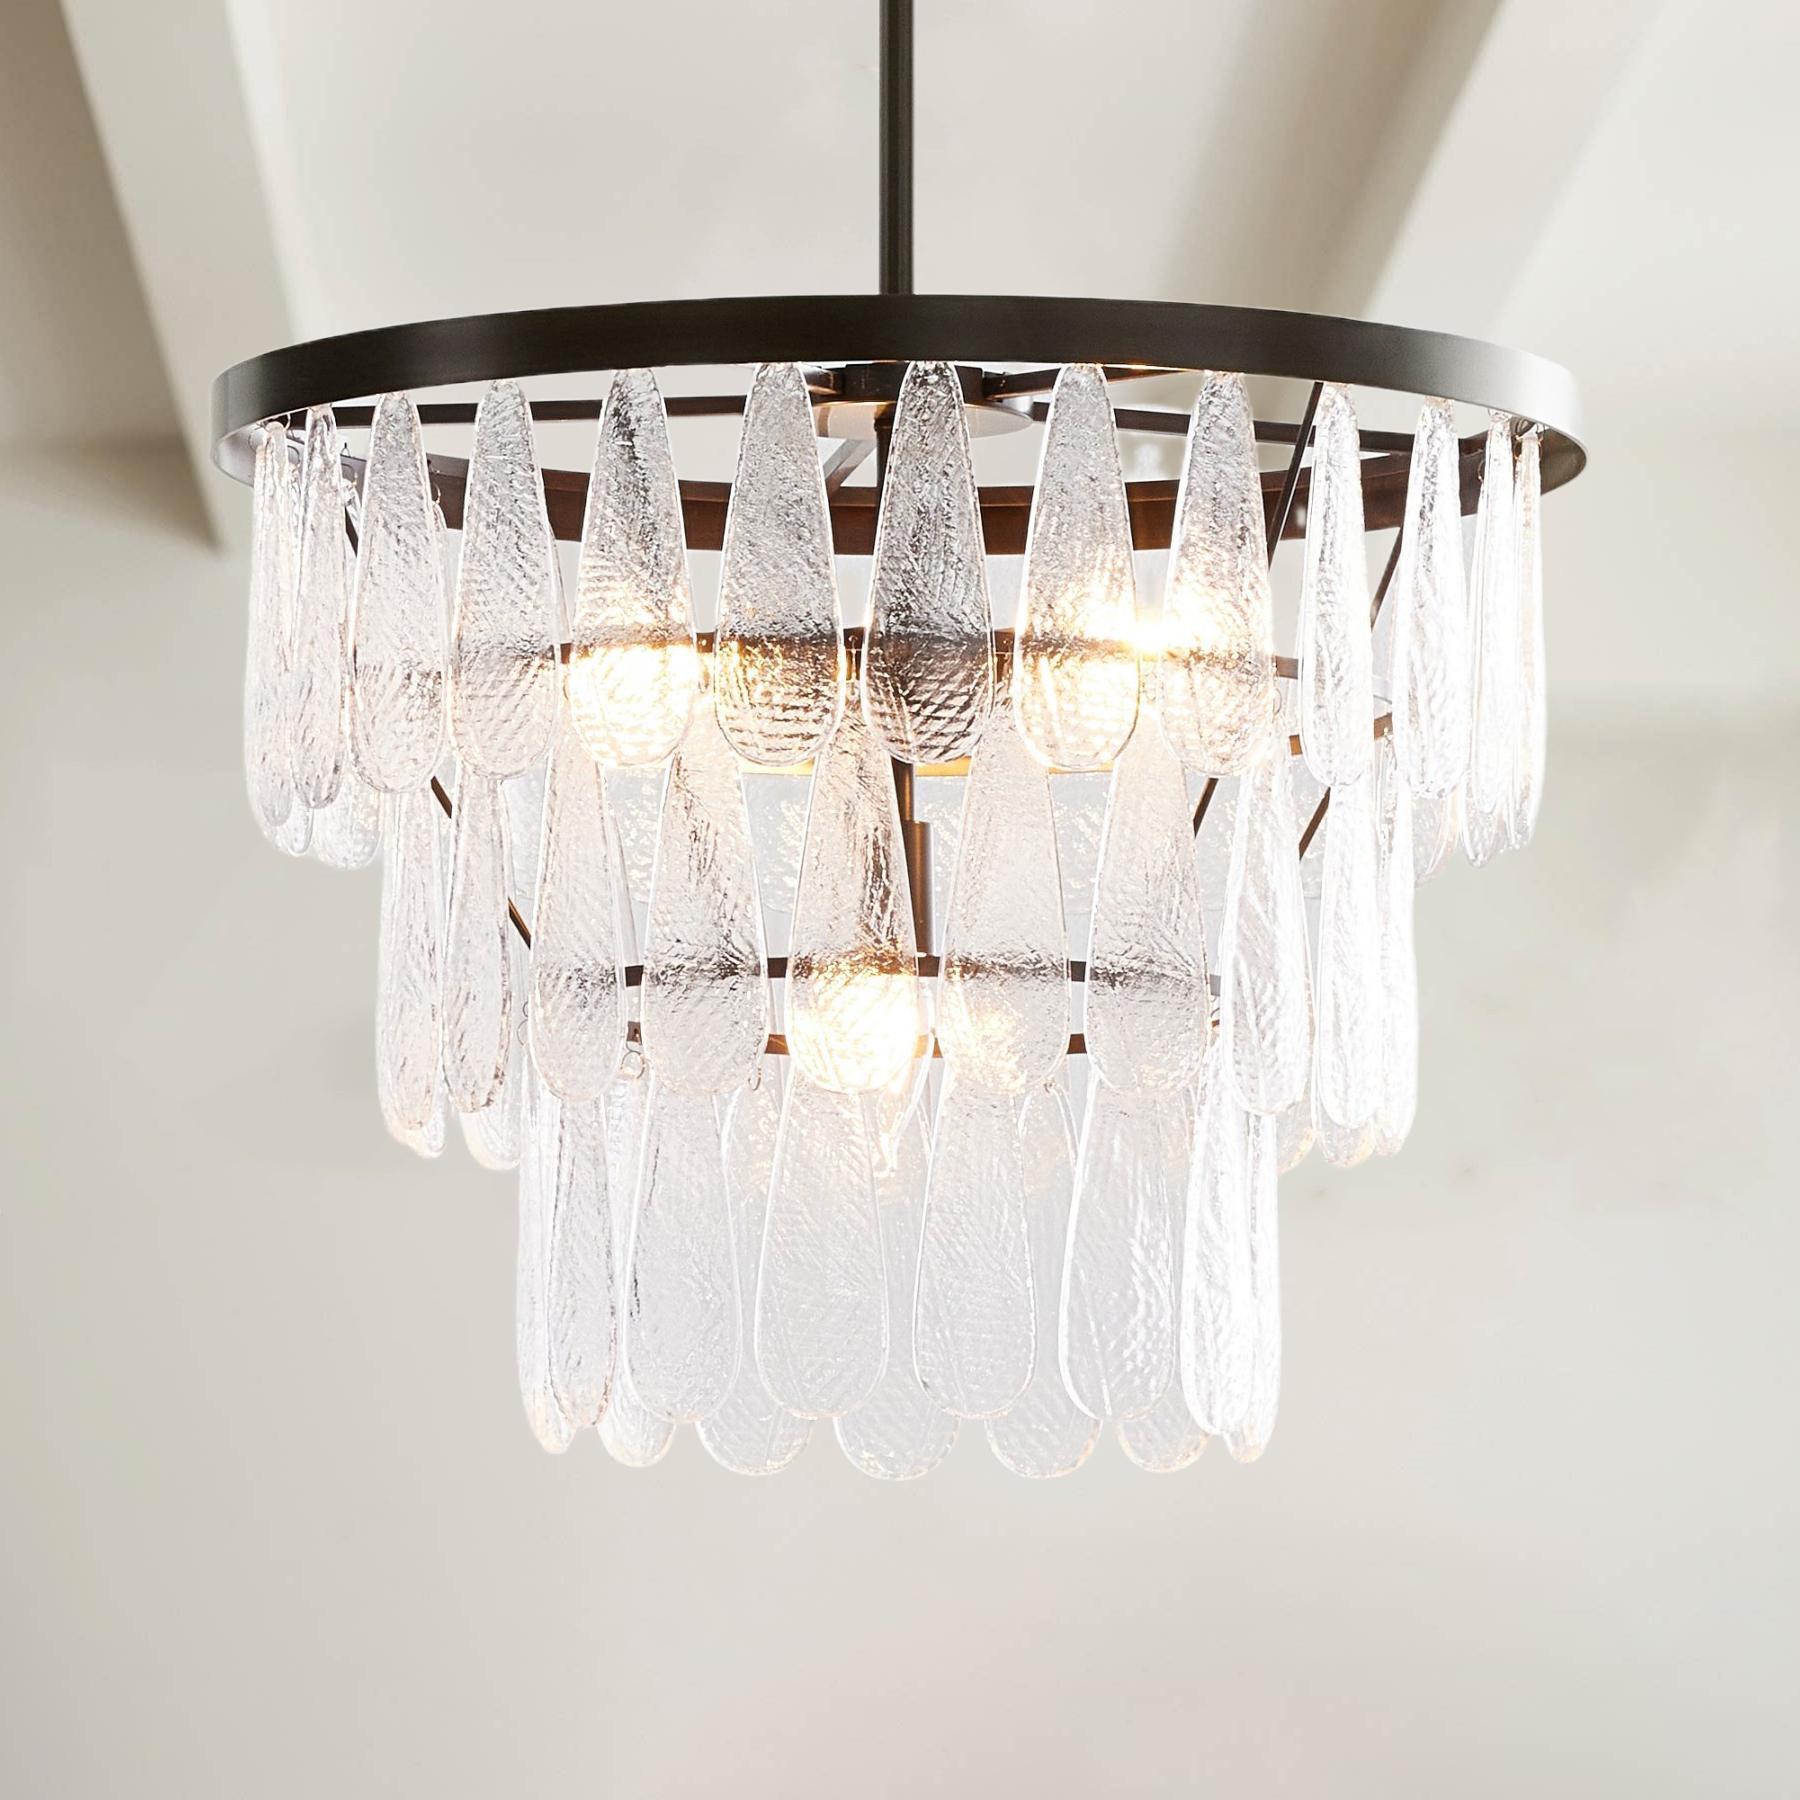 Texture Glass Round Chandelier, Mable Textured Glass Round Chandelier